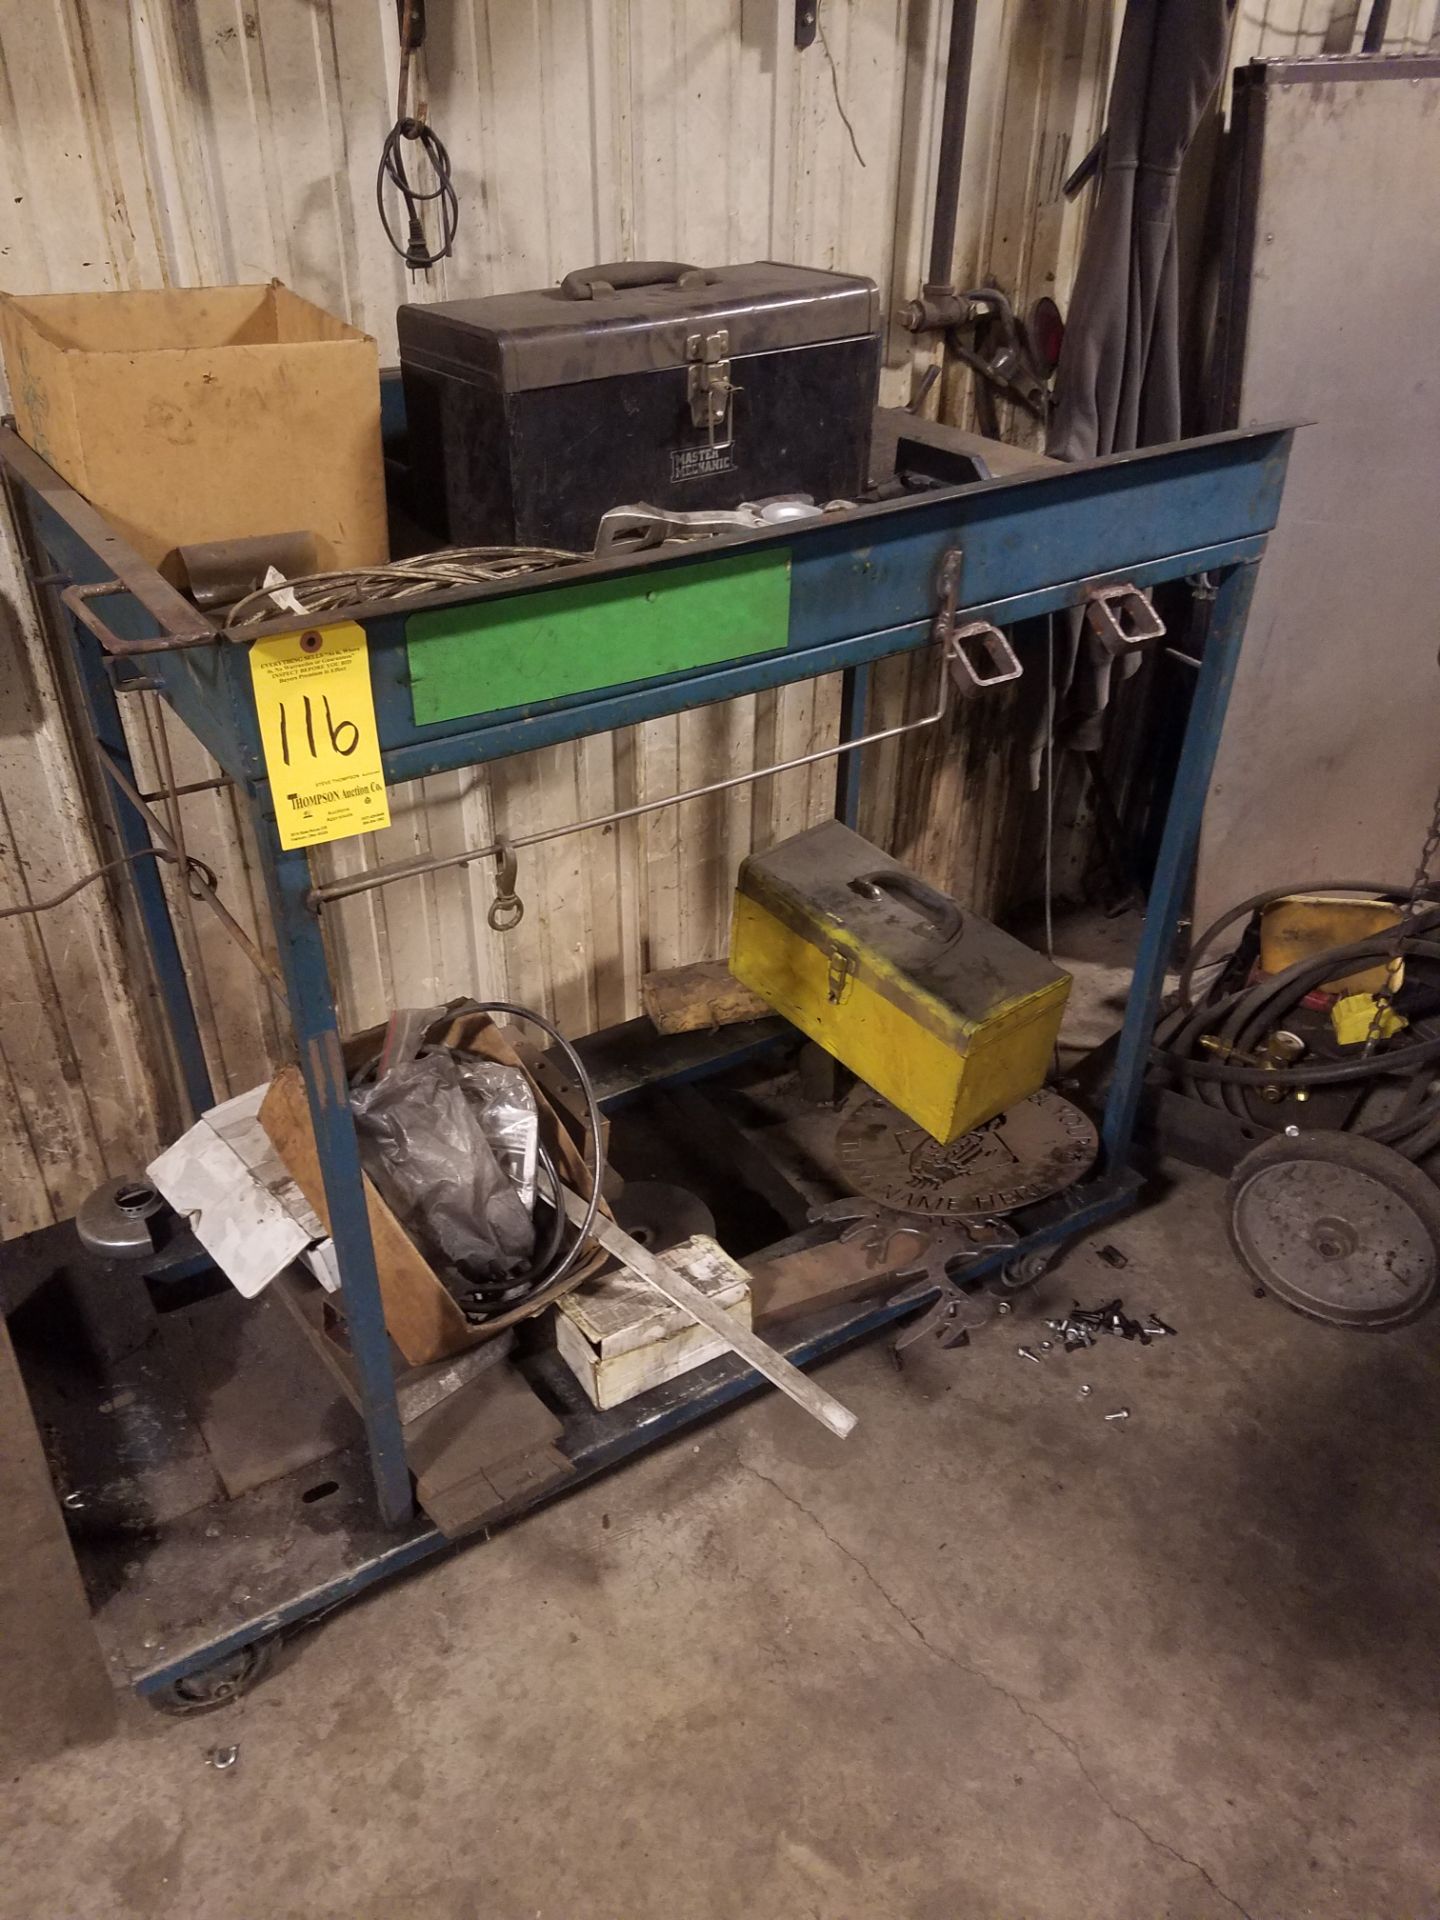 Metal Work Station and Contents